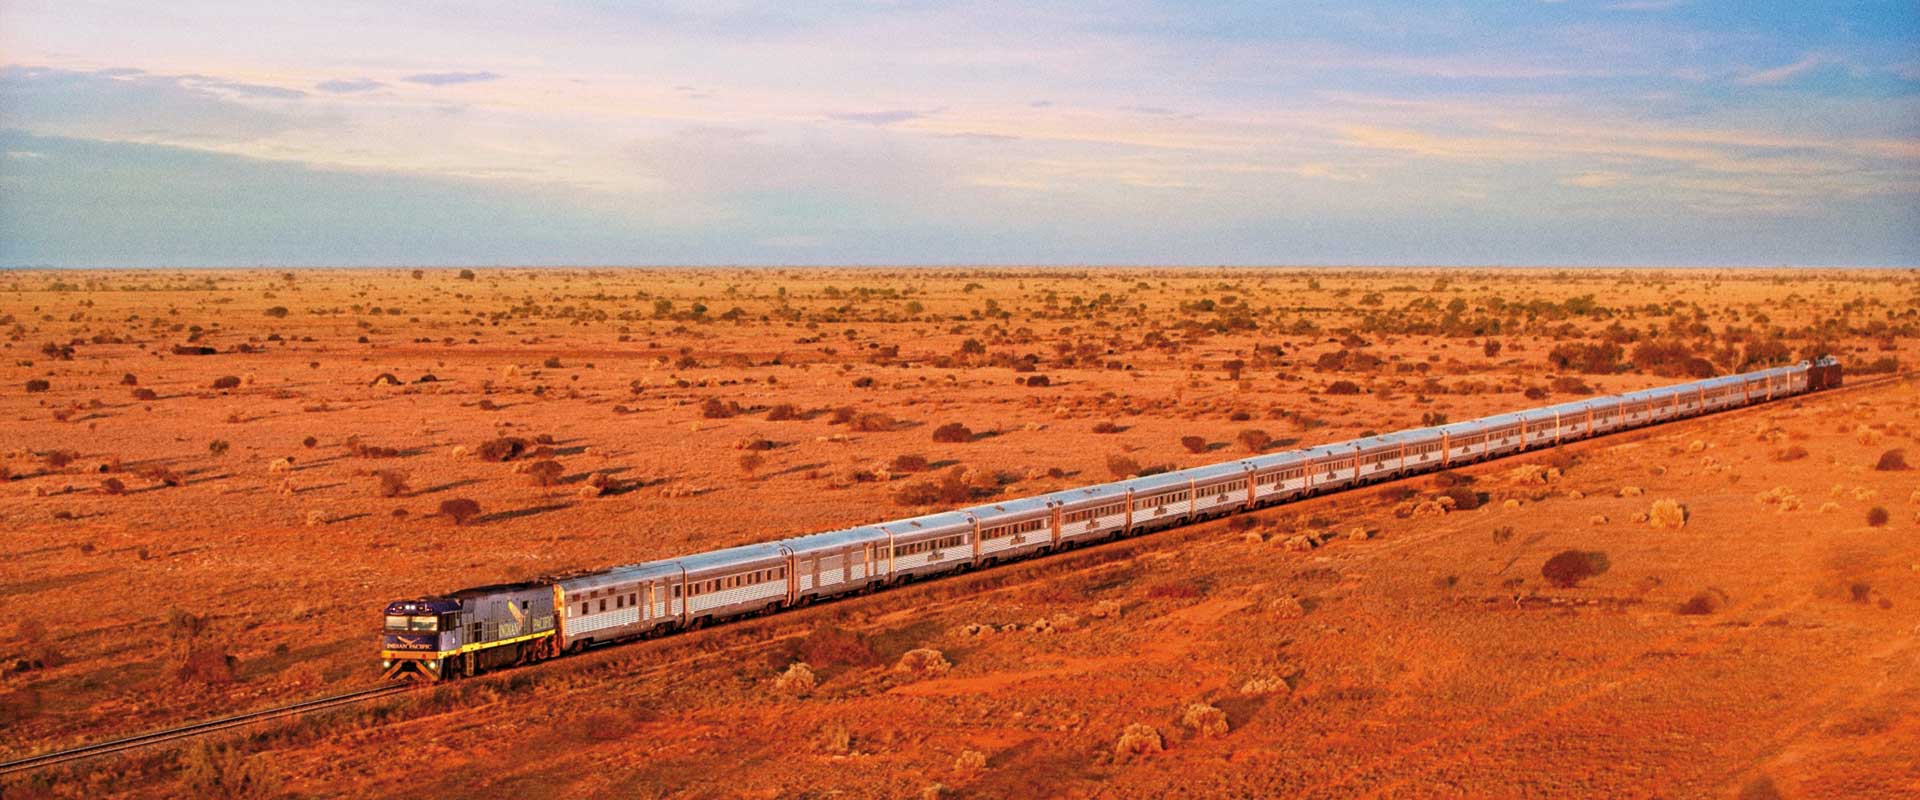 Indian Pacific train travelling through a red desert